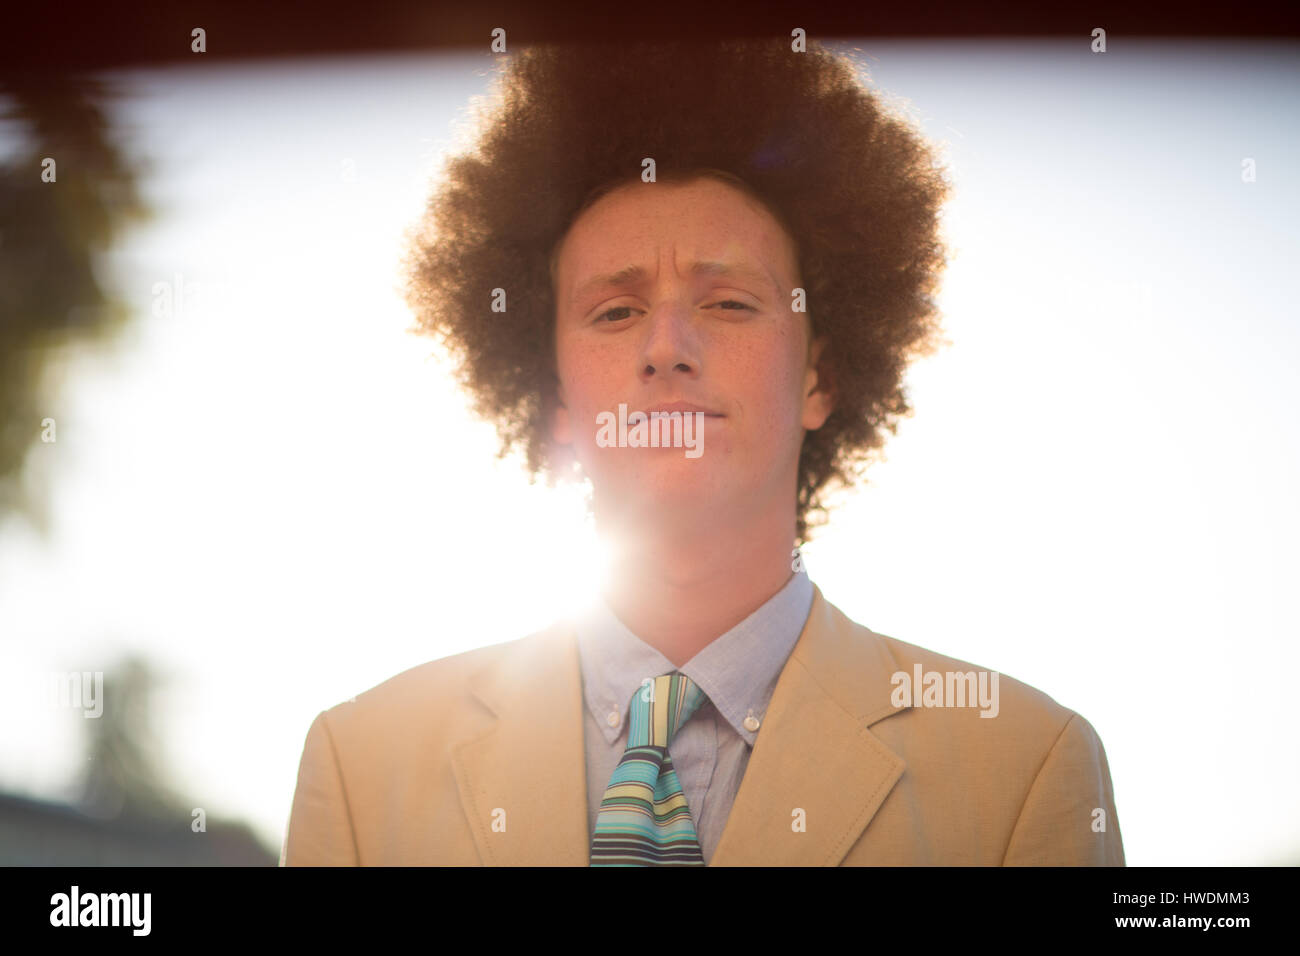 Portrait of teenage boy with red afro hair, wearing suit, outdoors Stock Photo